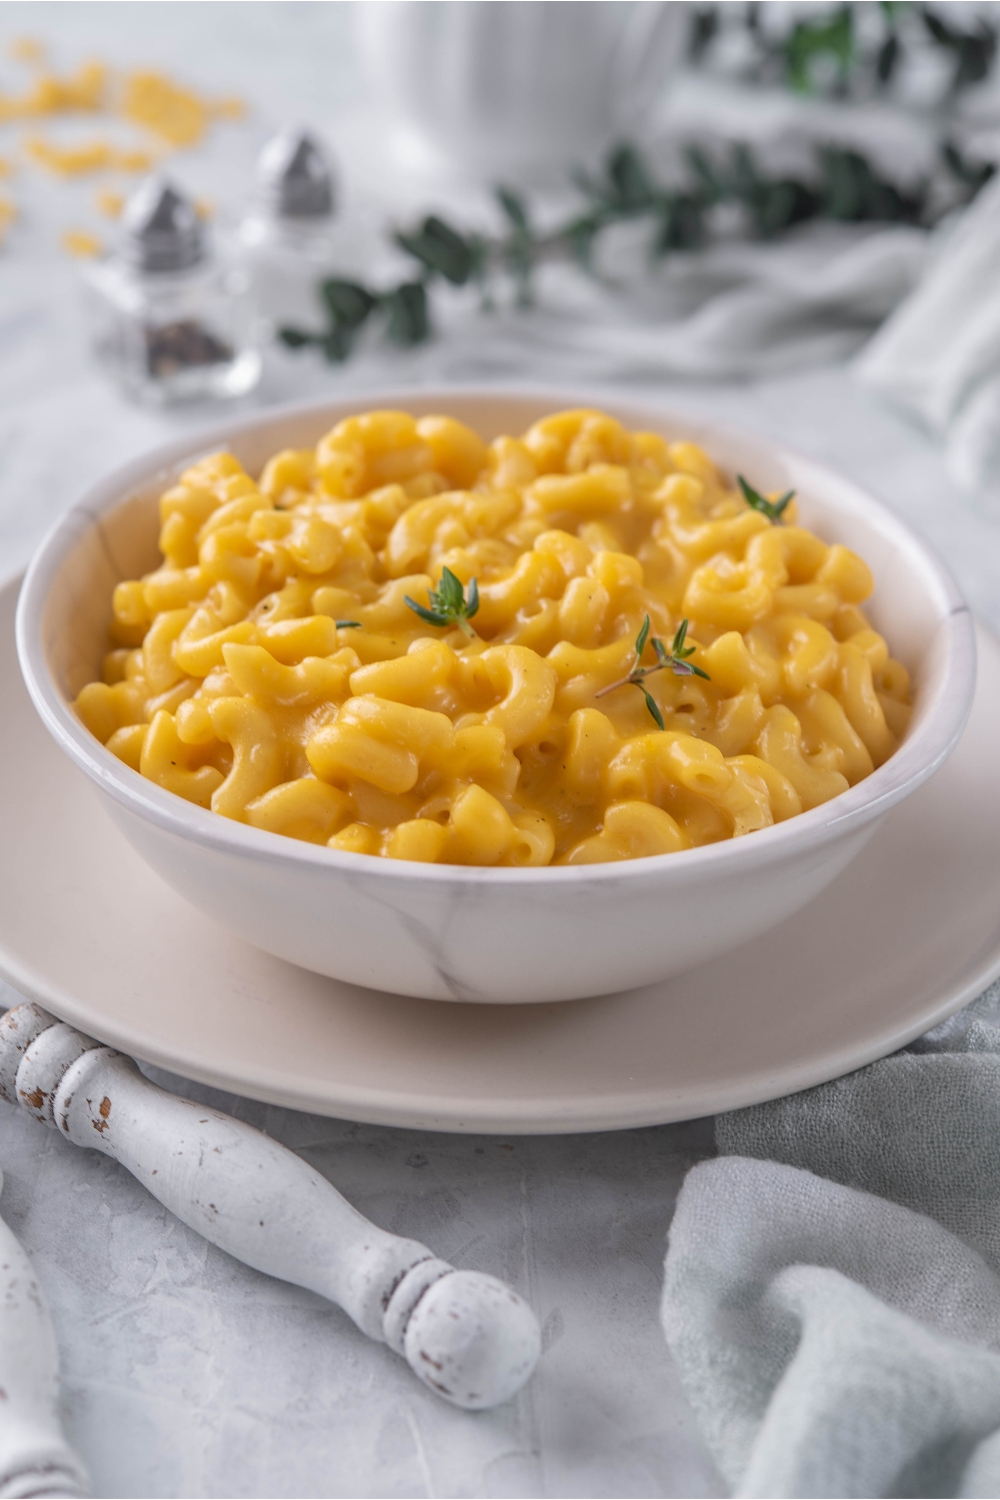 A bowl of creamy macaroni and cheese with fresh herbs garnished on top.